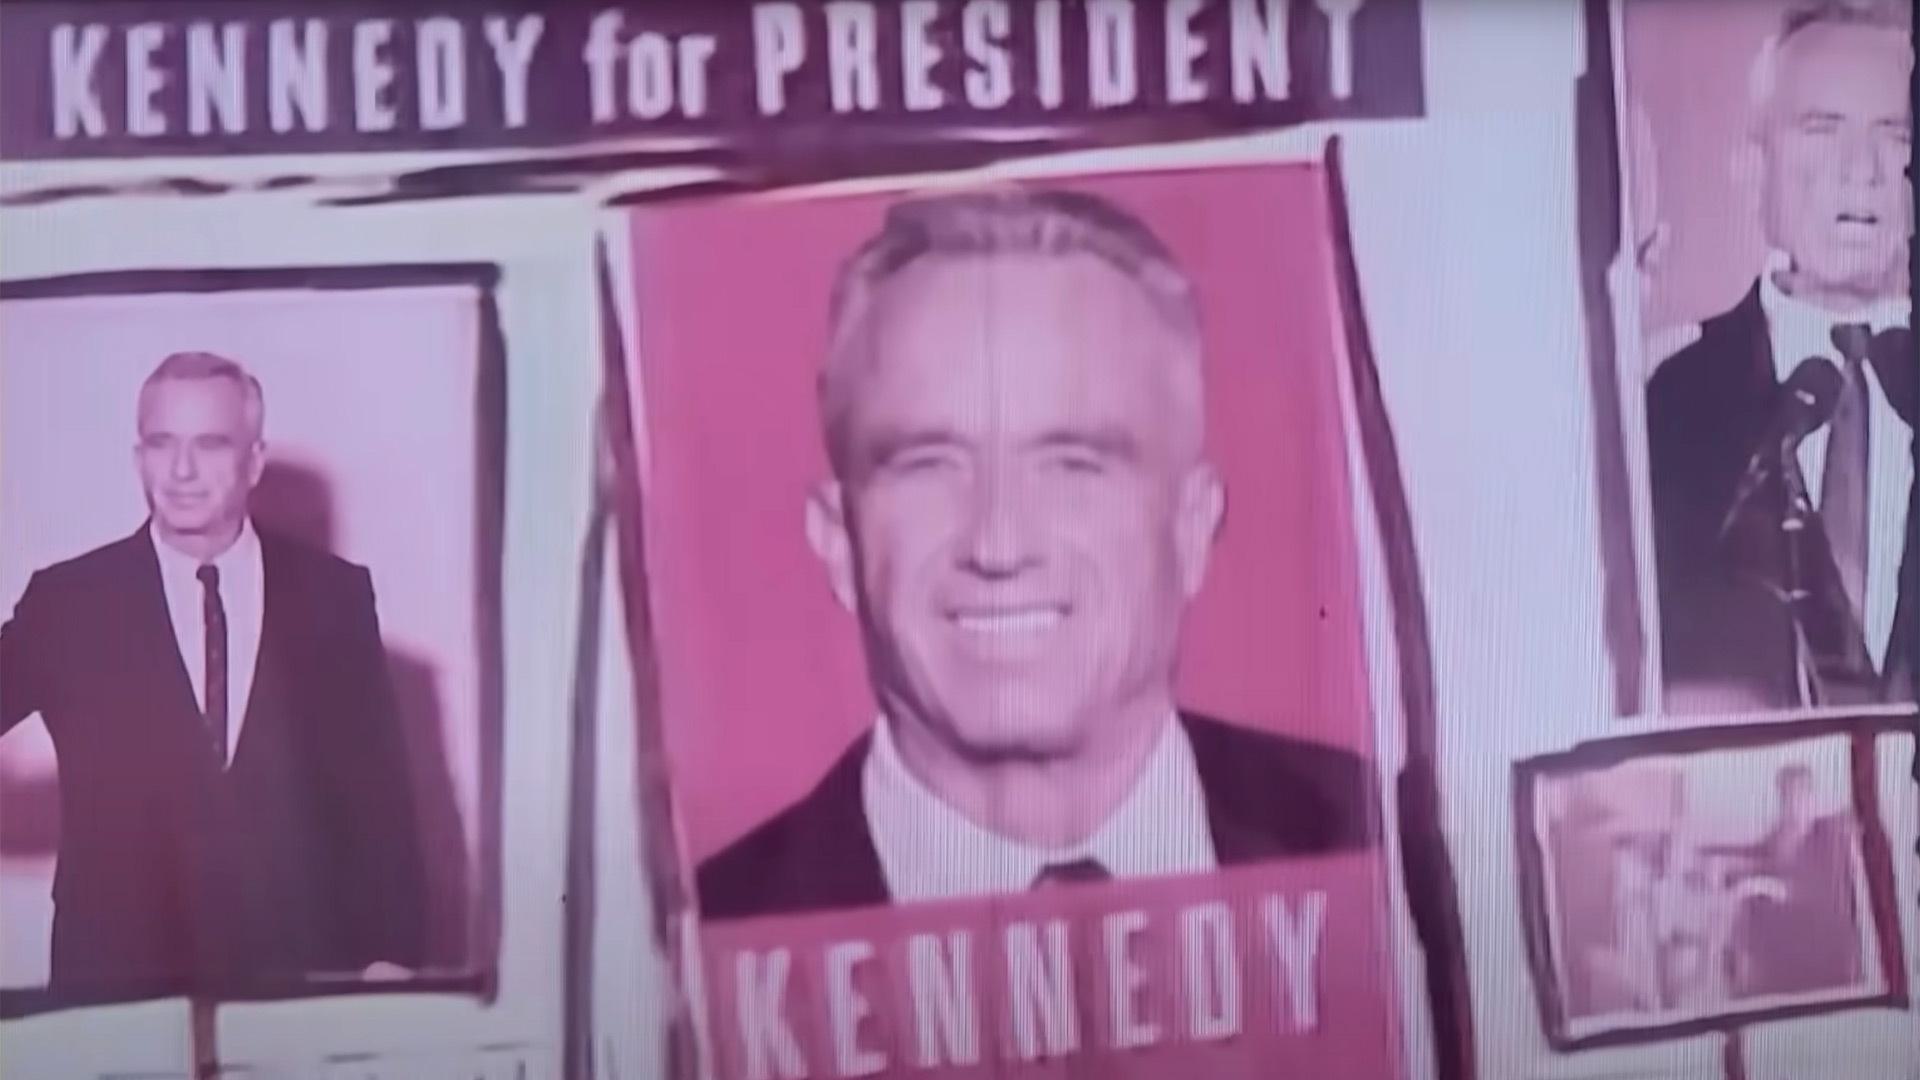 Robert F. Kennedy Jr. with signs that say Kennedy for President